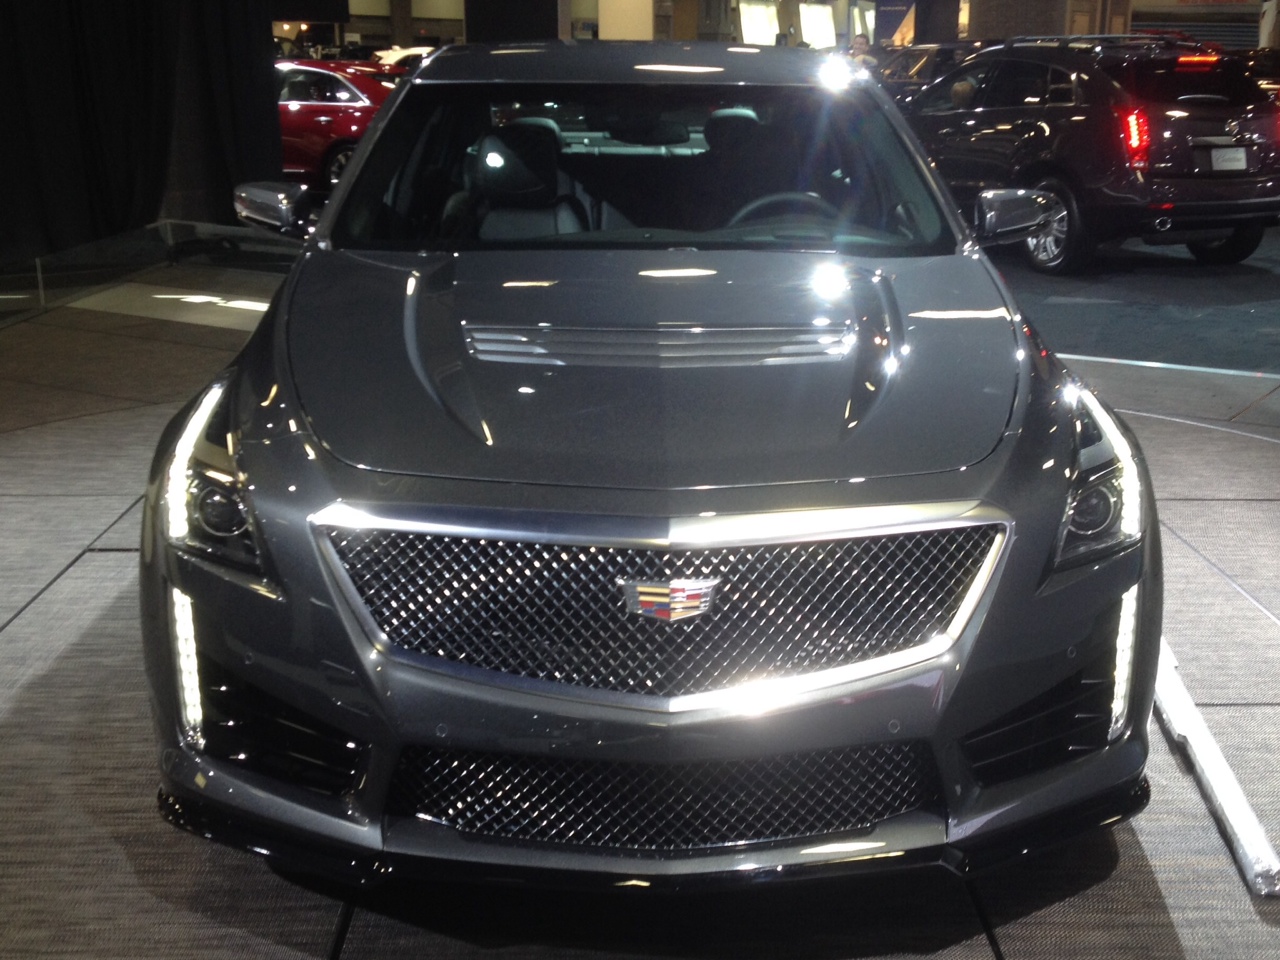 The Z06's equally sinister sibling, the 2016 Cadillac CTS-V, also packs over 600 horsepower. Cadillac president Johan de Nysschen tells us: it "overwhelms every other product offering in that segment." (WTOP/John Aaron)